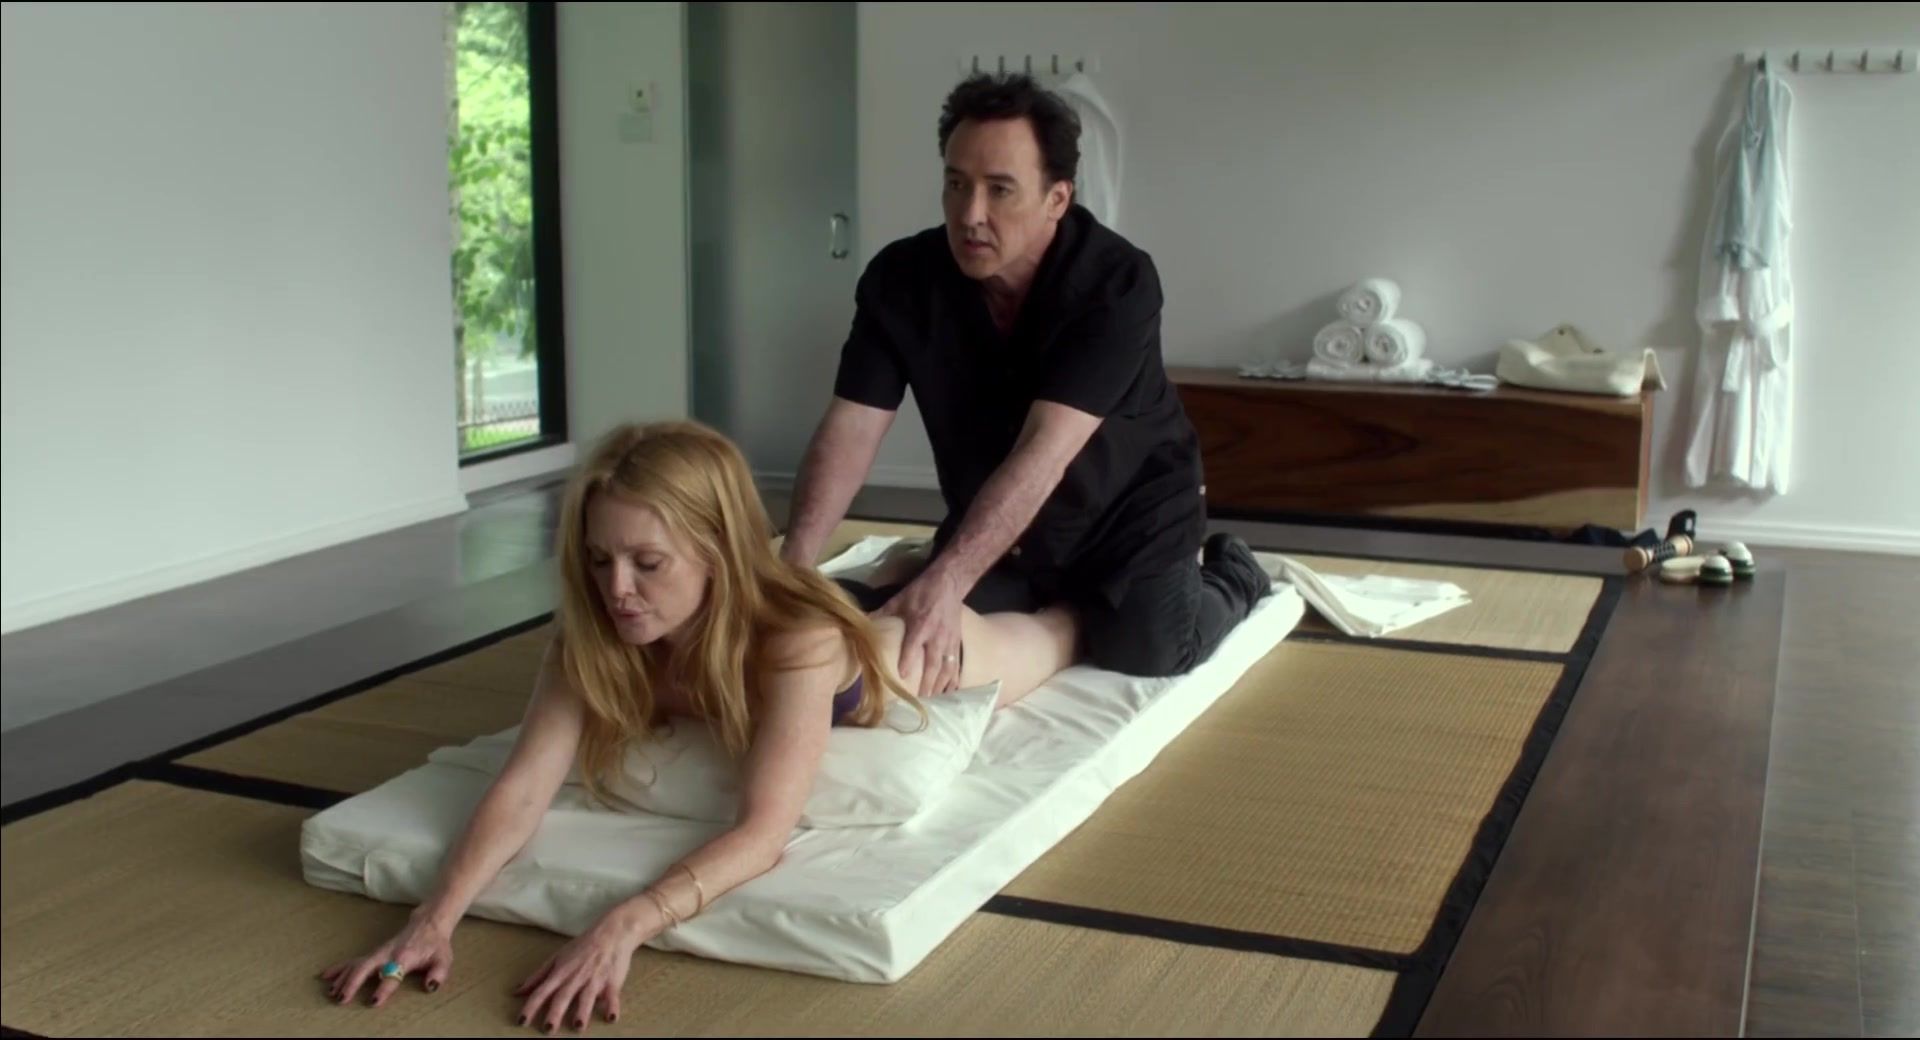 Cam Girl Submission video & Lesbian Celebs Scene | Celebrity: Julianne Moore nude | The movie "Maps to the Stars" LiveX - 1